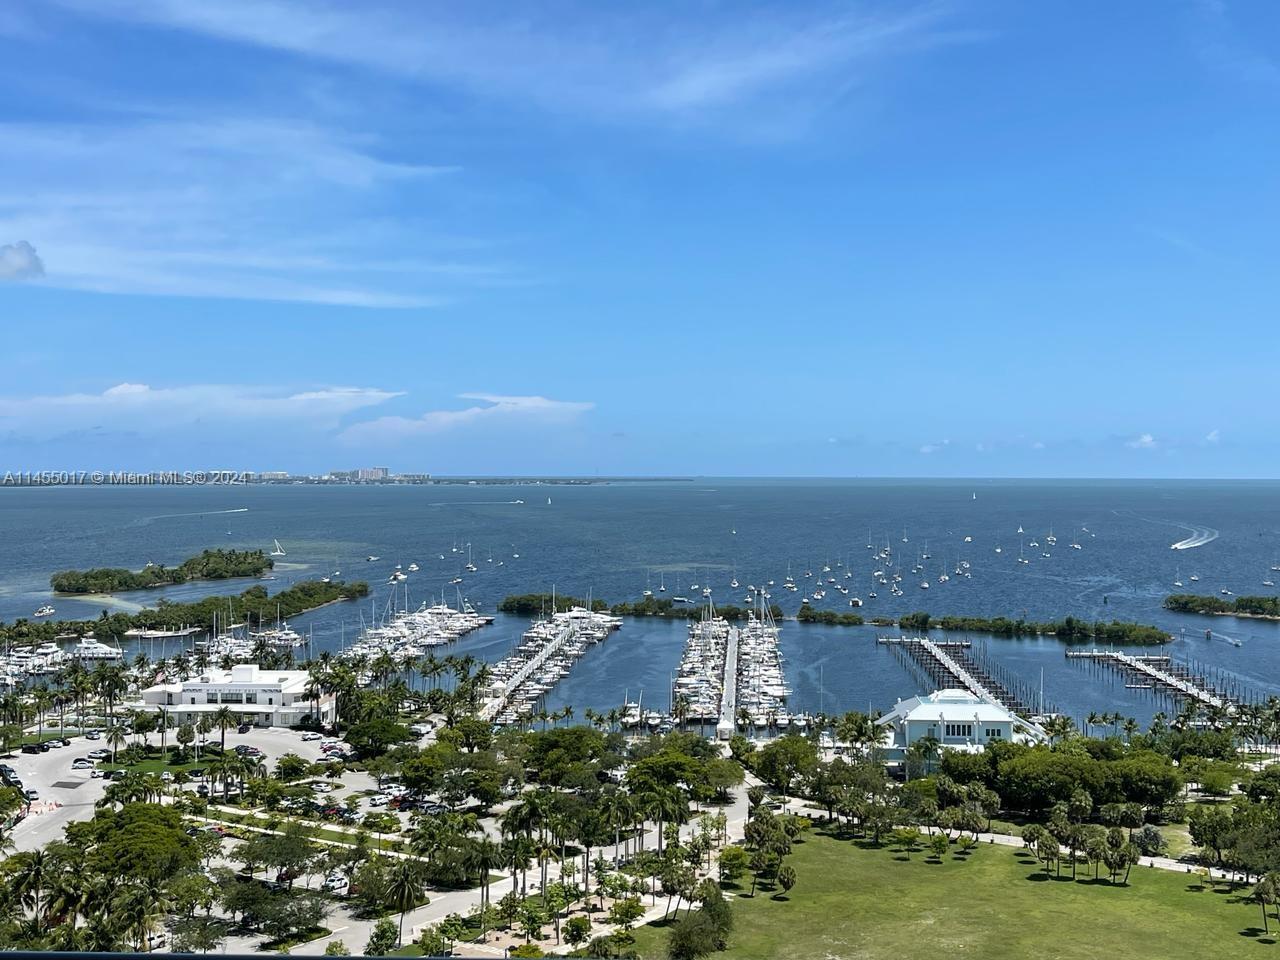 One-of-a-kind PH Ritz Residence in Coconut Grove. Oversized separate terraces with an amazing view of the ocean and breathtaking sunrise and sunset postal views. Only 2 units on this floor with 2 separate entrances. PH has 4935 sq ft with extra large rooms for entertainment while enjoying the magnificent views of Biscayne Bay. Fully furnished with Superior Marble throughout, Upgraded Stainless Viking Kitchen including Granite Countertops. Master Bath with Jacuzzi, Shower, and Double sinks. Three Terraces. Exclusive Ritz lifestyle shares amenities with the Hotel including Concierge, Restaurant, Pools, Gym, Spa. Within walking distance from Fresh Market, Cocowalk, Marina, Fine Dining, Shopping and so much more... Minutes from first-class shopping and dining in Brickell, Miami.